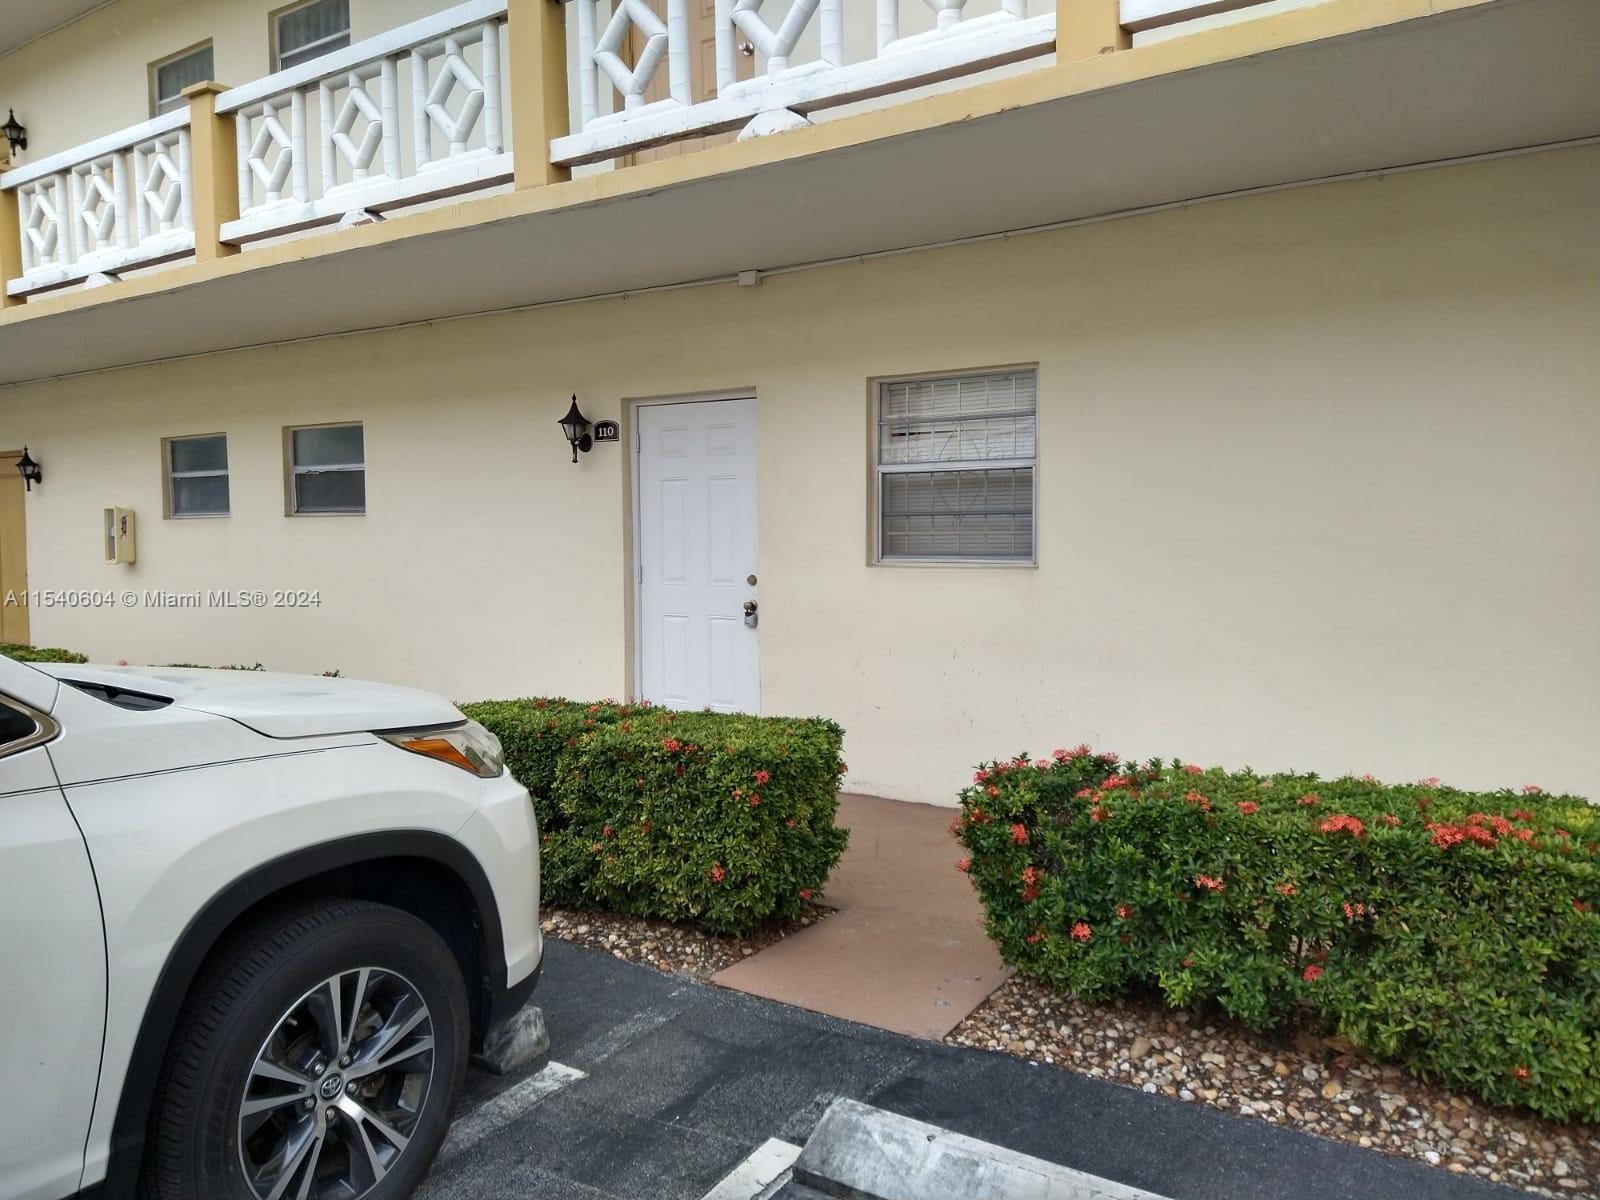 Photo of 5111 W Oakland Park Blvd #110 in Lauderdale Lakes, FL